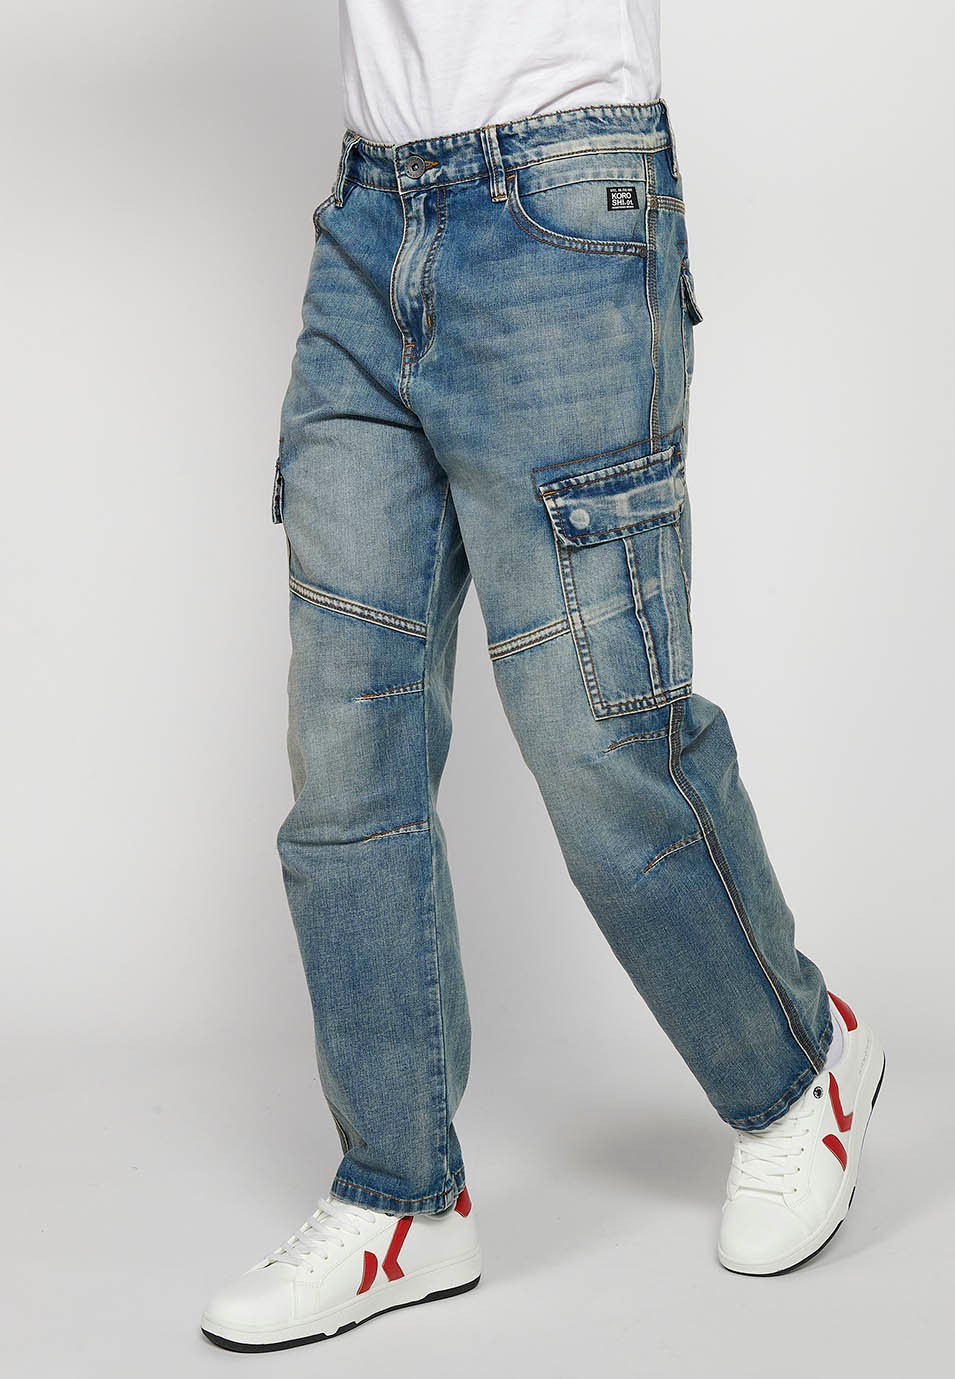 Long Cargo Pants with Front Zipper and Button Closure with Side Pockets with Flap in Blue for Men 4